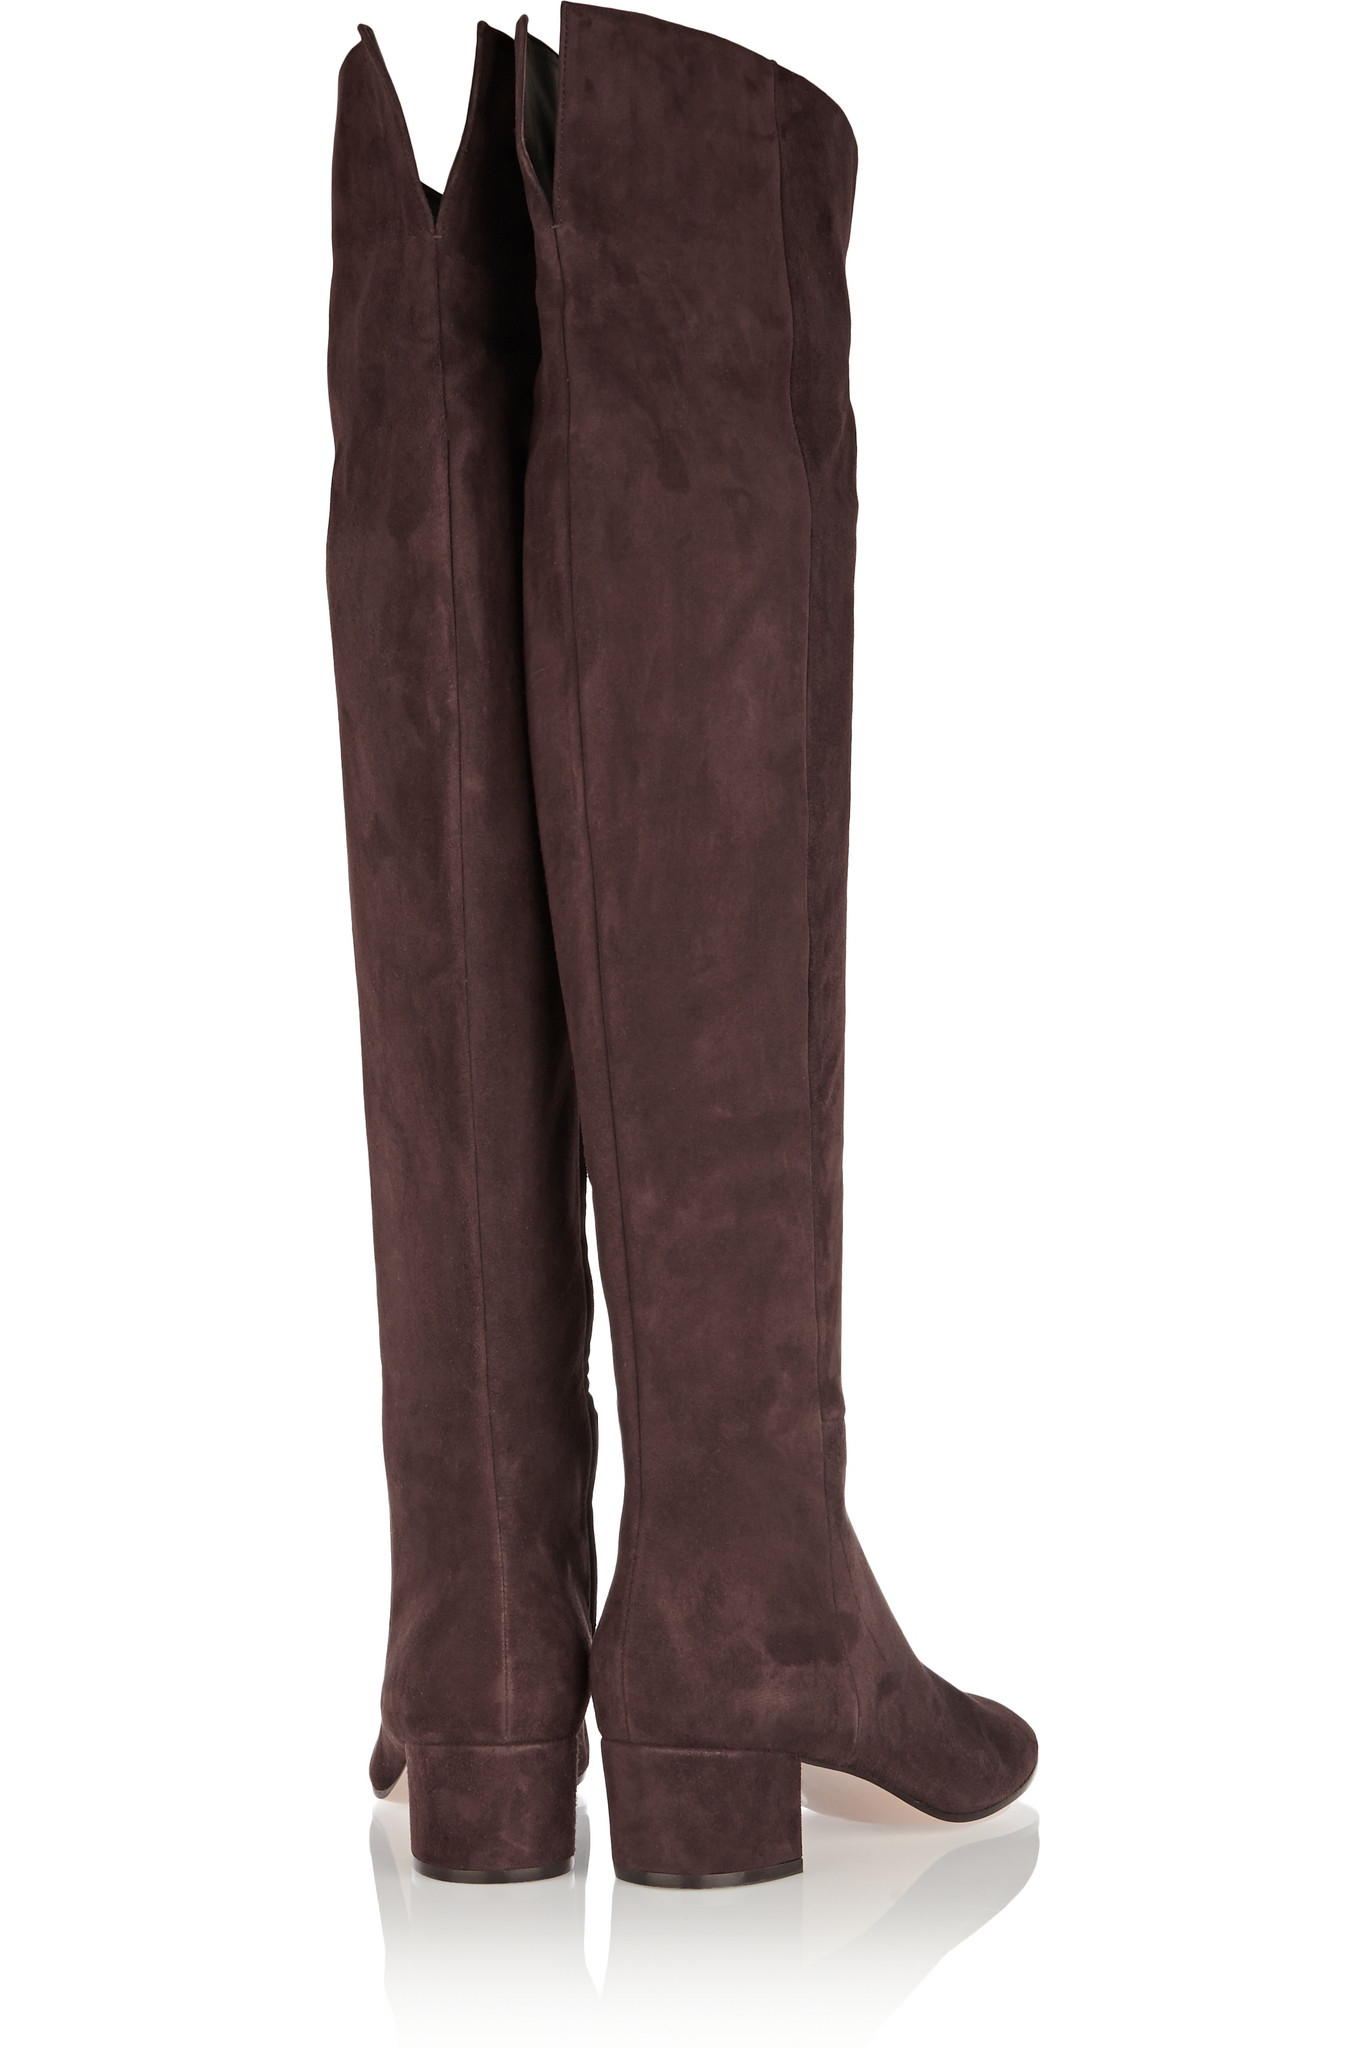 Gianvito rossi Suede Over-the-knee Boots in Brown | Lyst